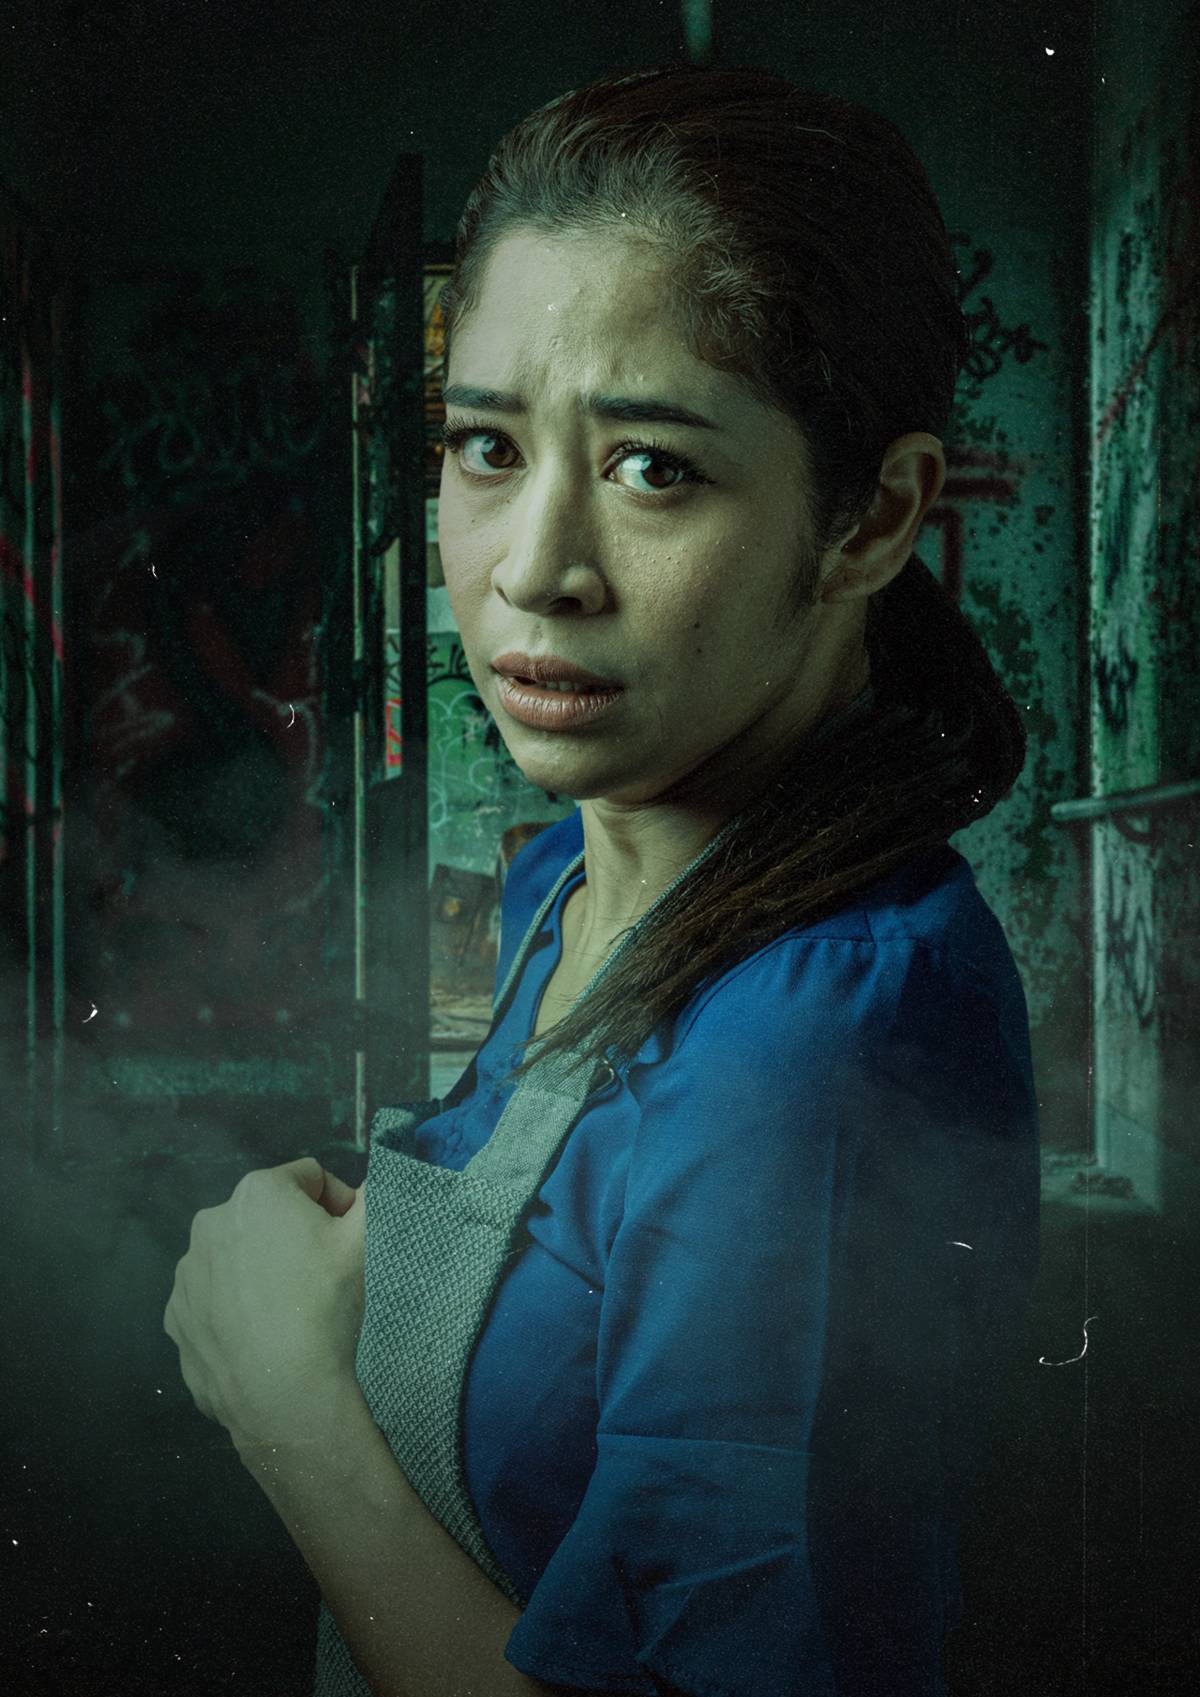 Murder at Old Changi Hospital: The Haunting Starts This Halloween Season from 8 October 2021